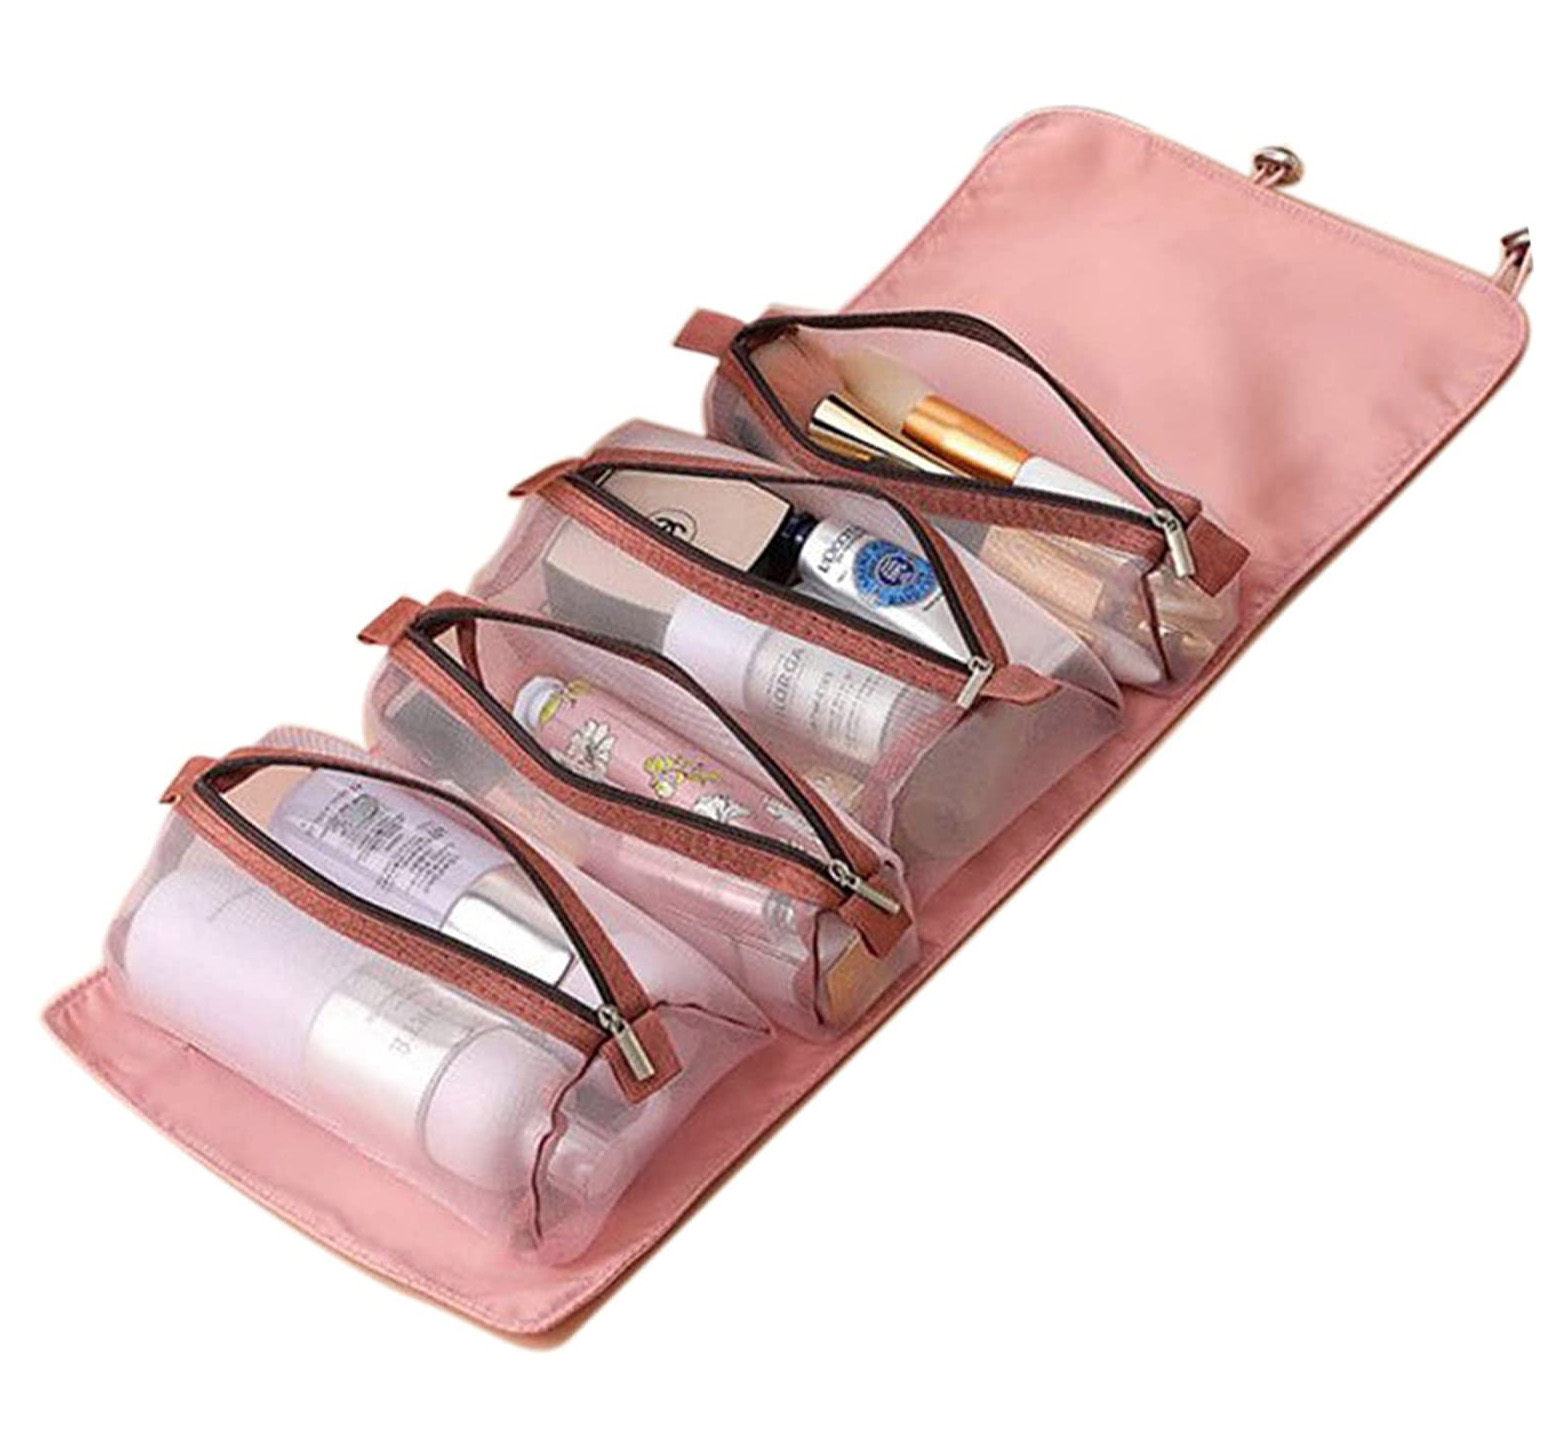 4 in 1 Makeup Pouch Set Cosmetic Organizer Folding Travel Case Toiletry Hanging Bag